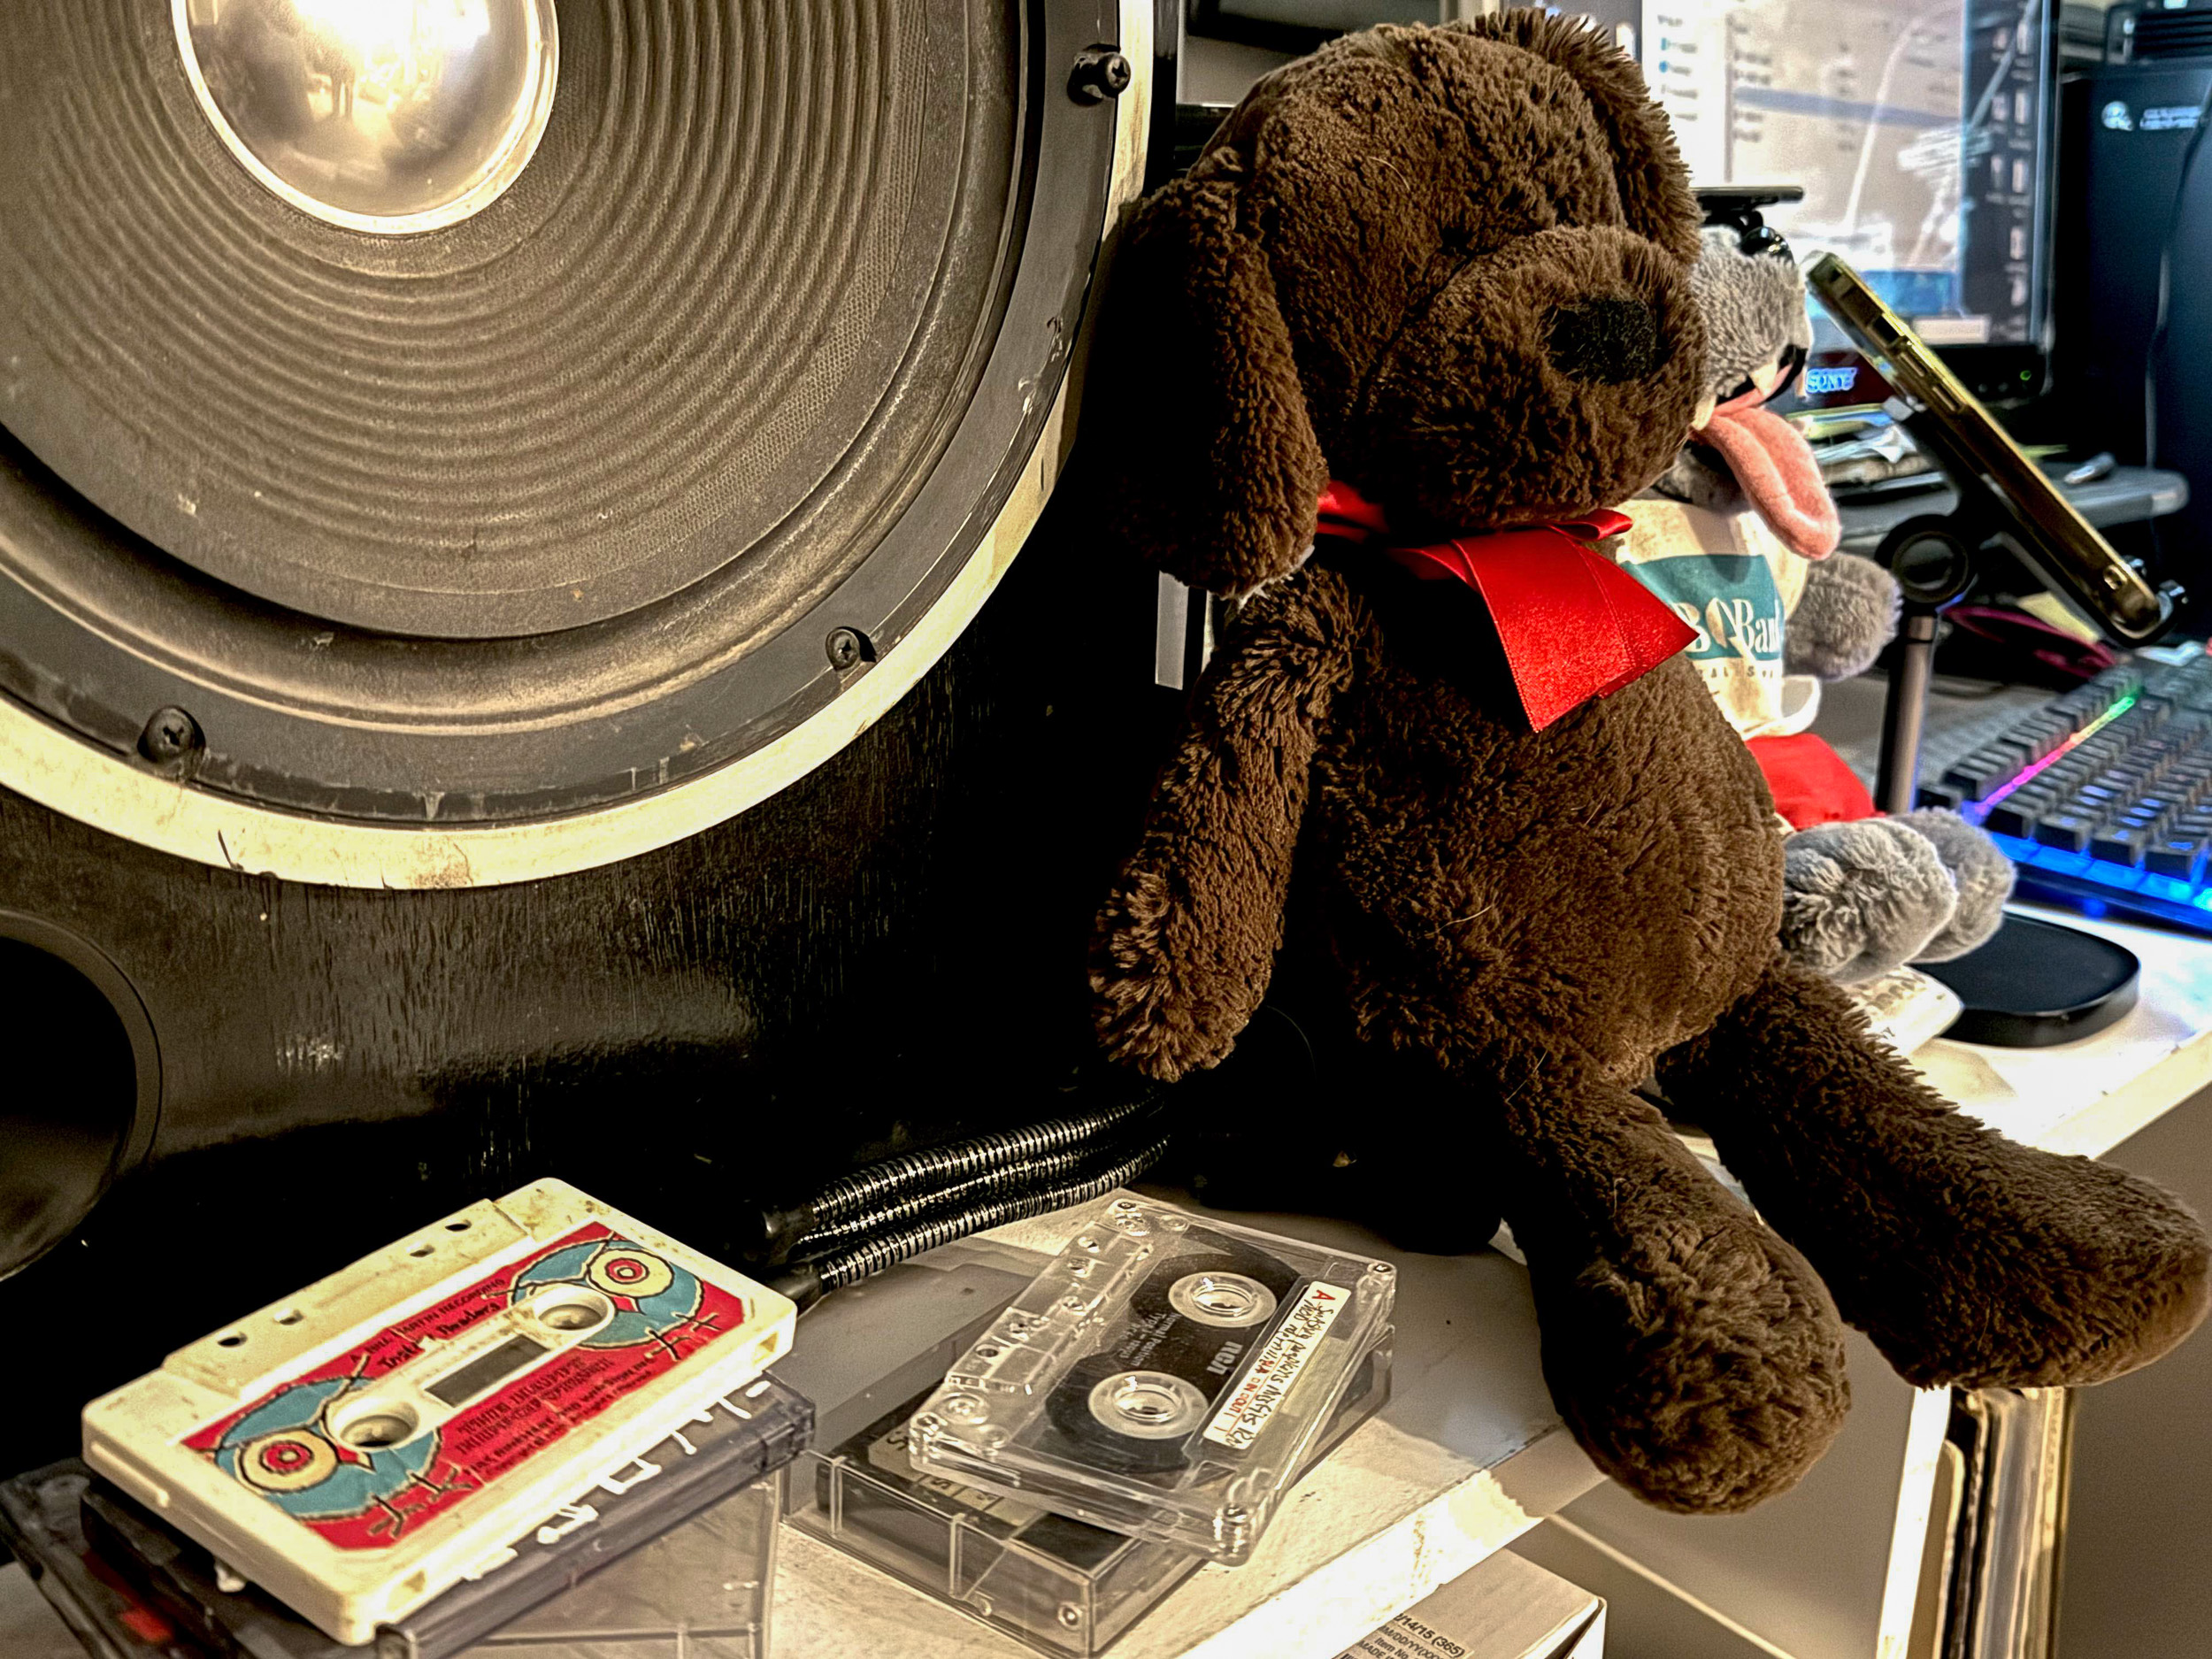 A stuffed brown bear sits on desk next to cassette tapes.